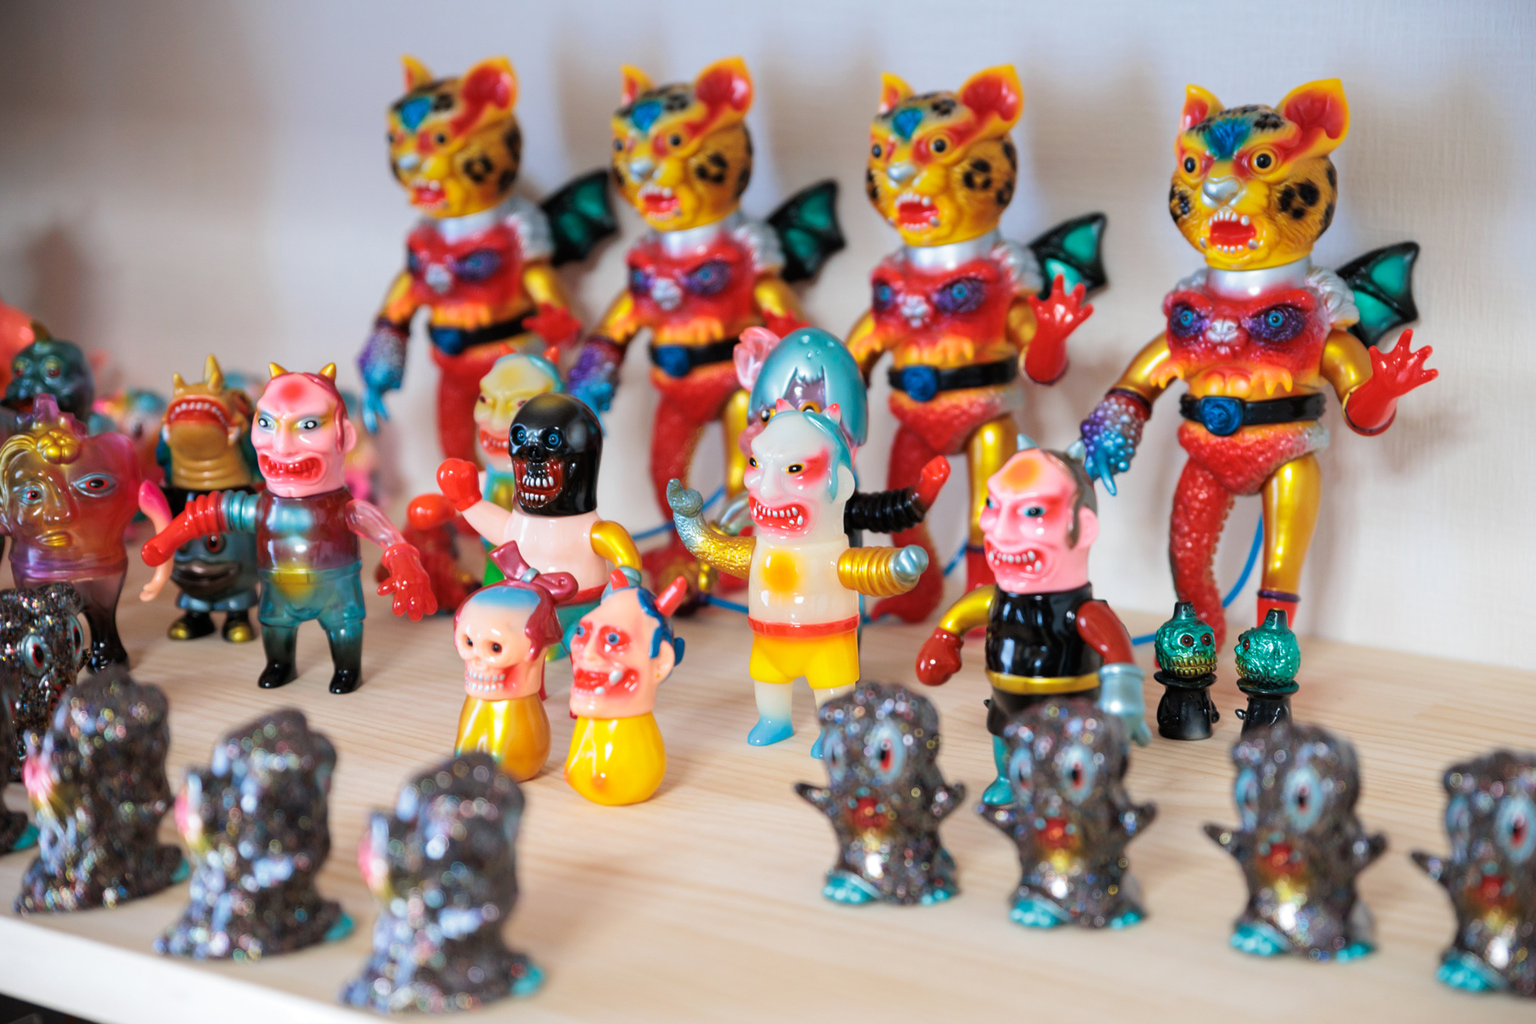 Japan’s Artisan-Made Vinyl Toys Are Making Collectors Go Wild